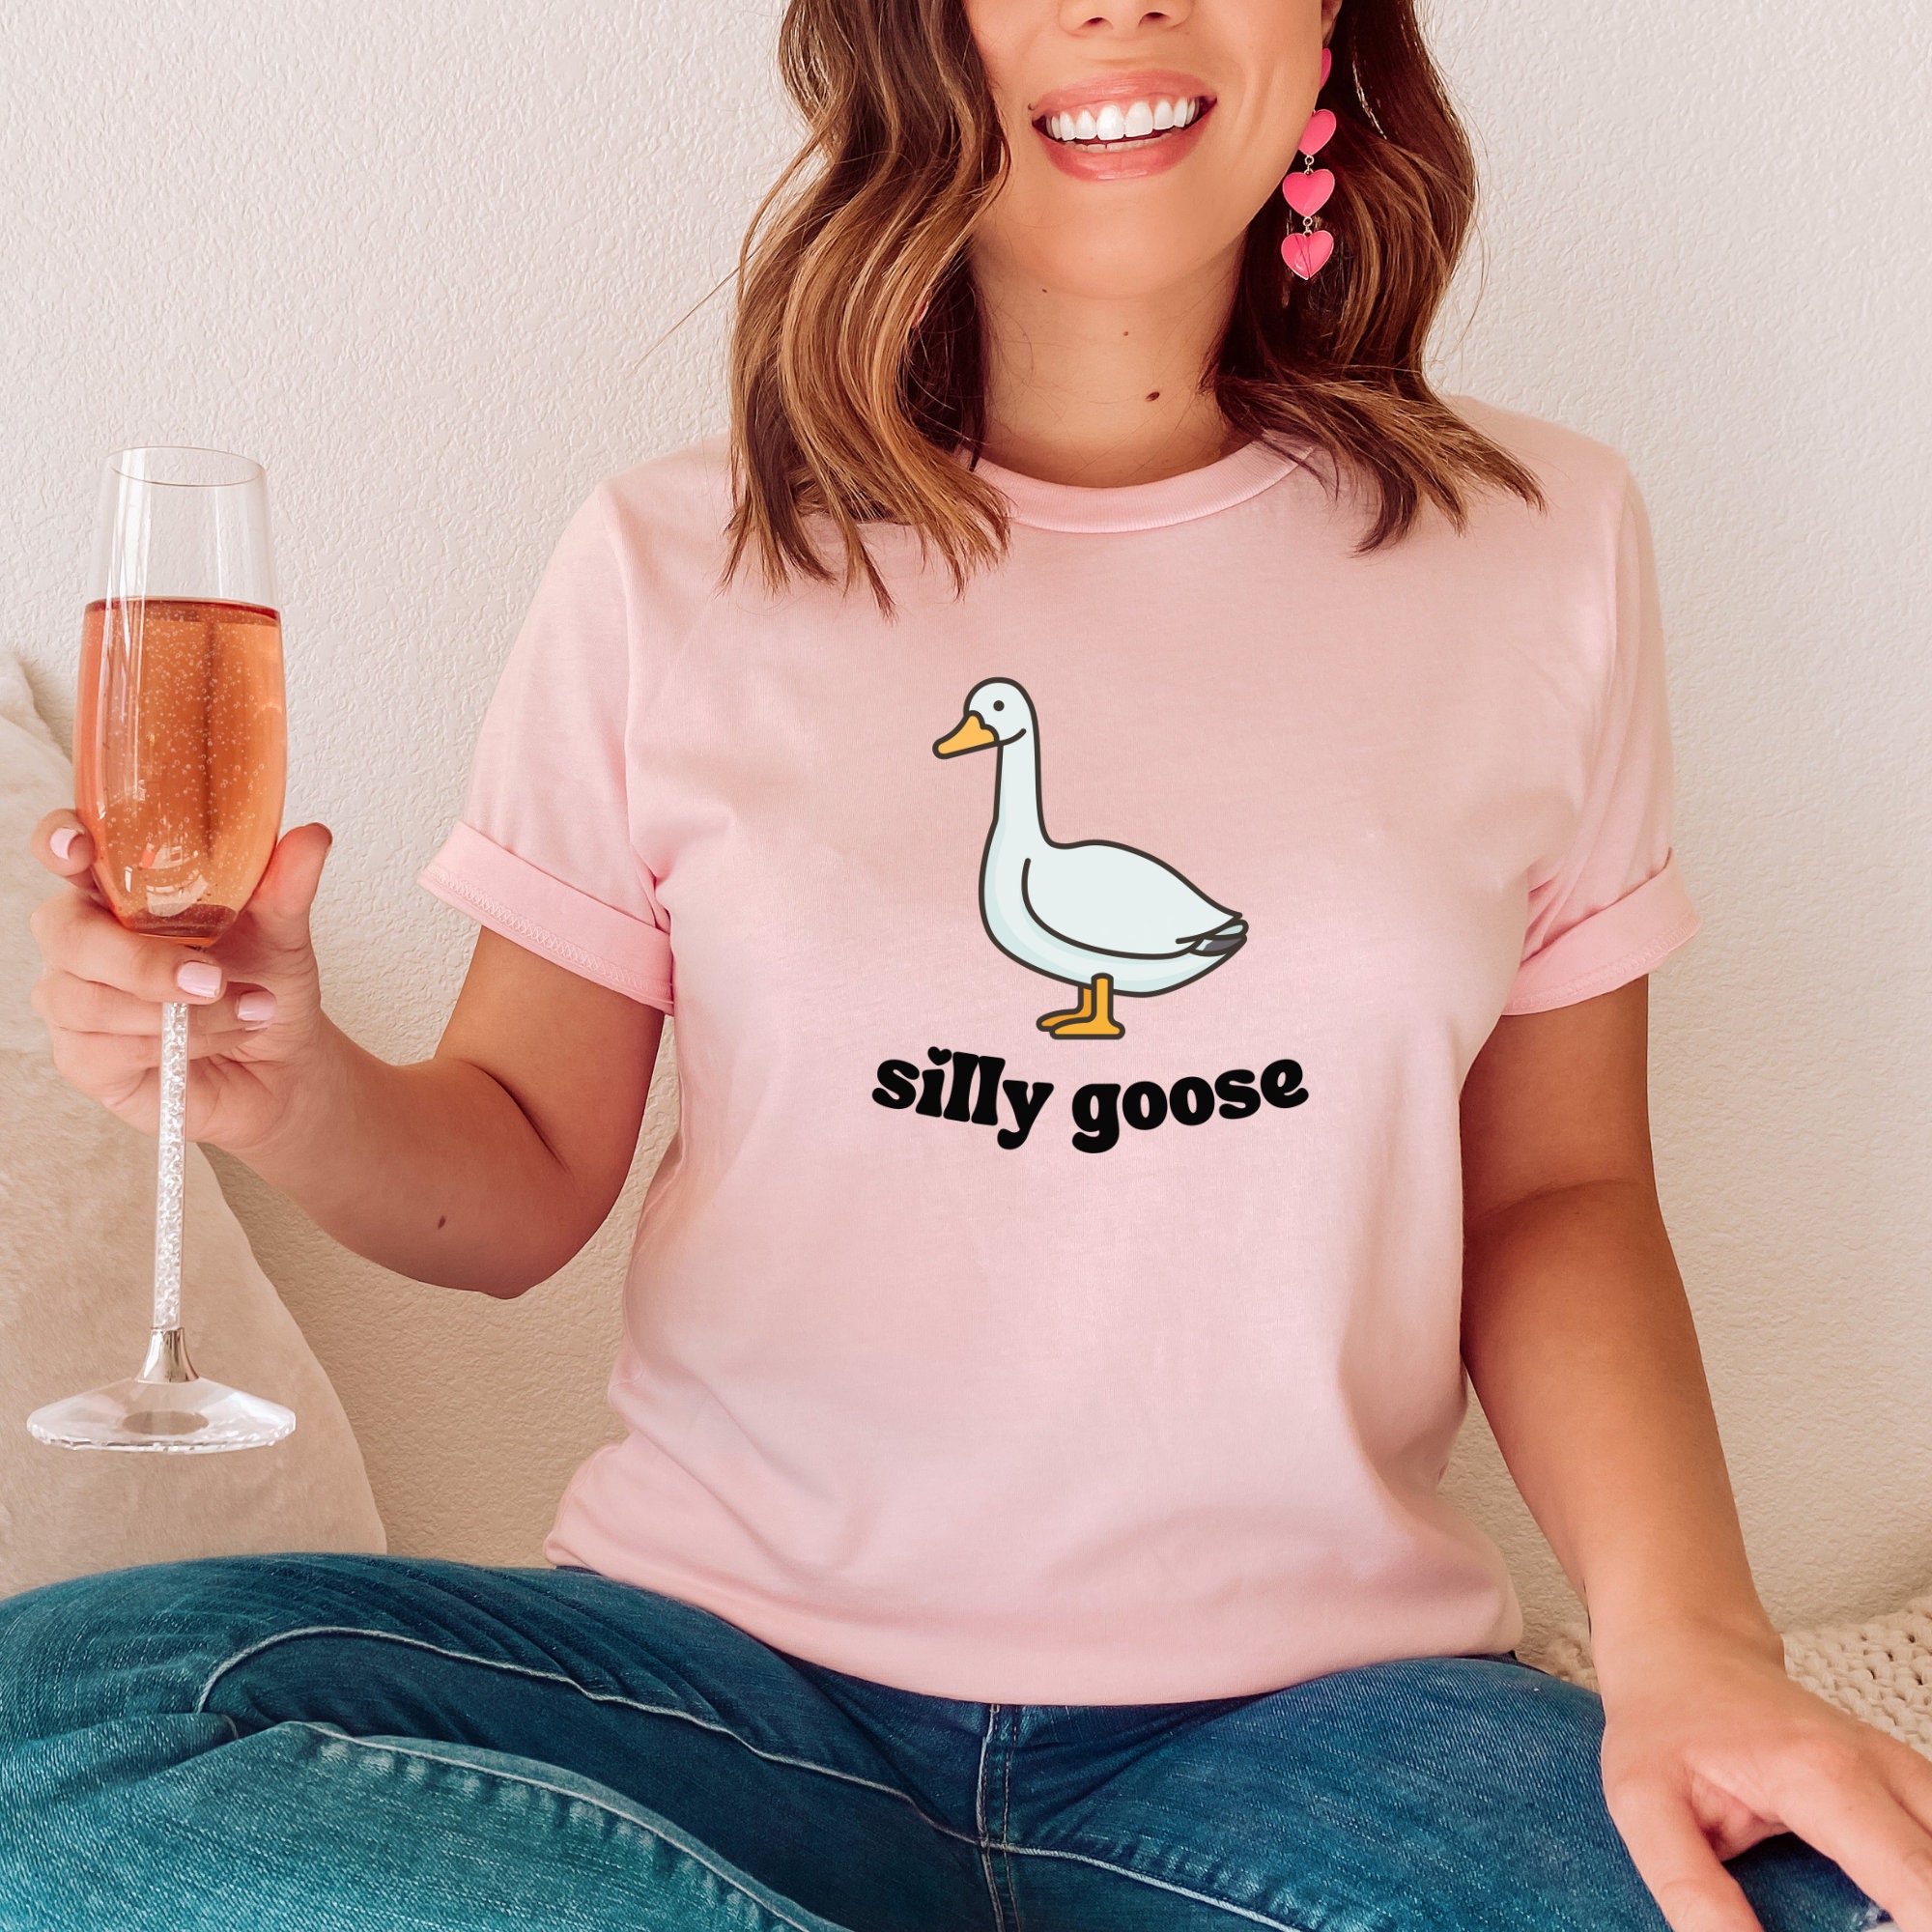 Discover Silly Goose T-Shirt  Funny Shirt - Silly Goose Tshirt